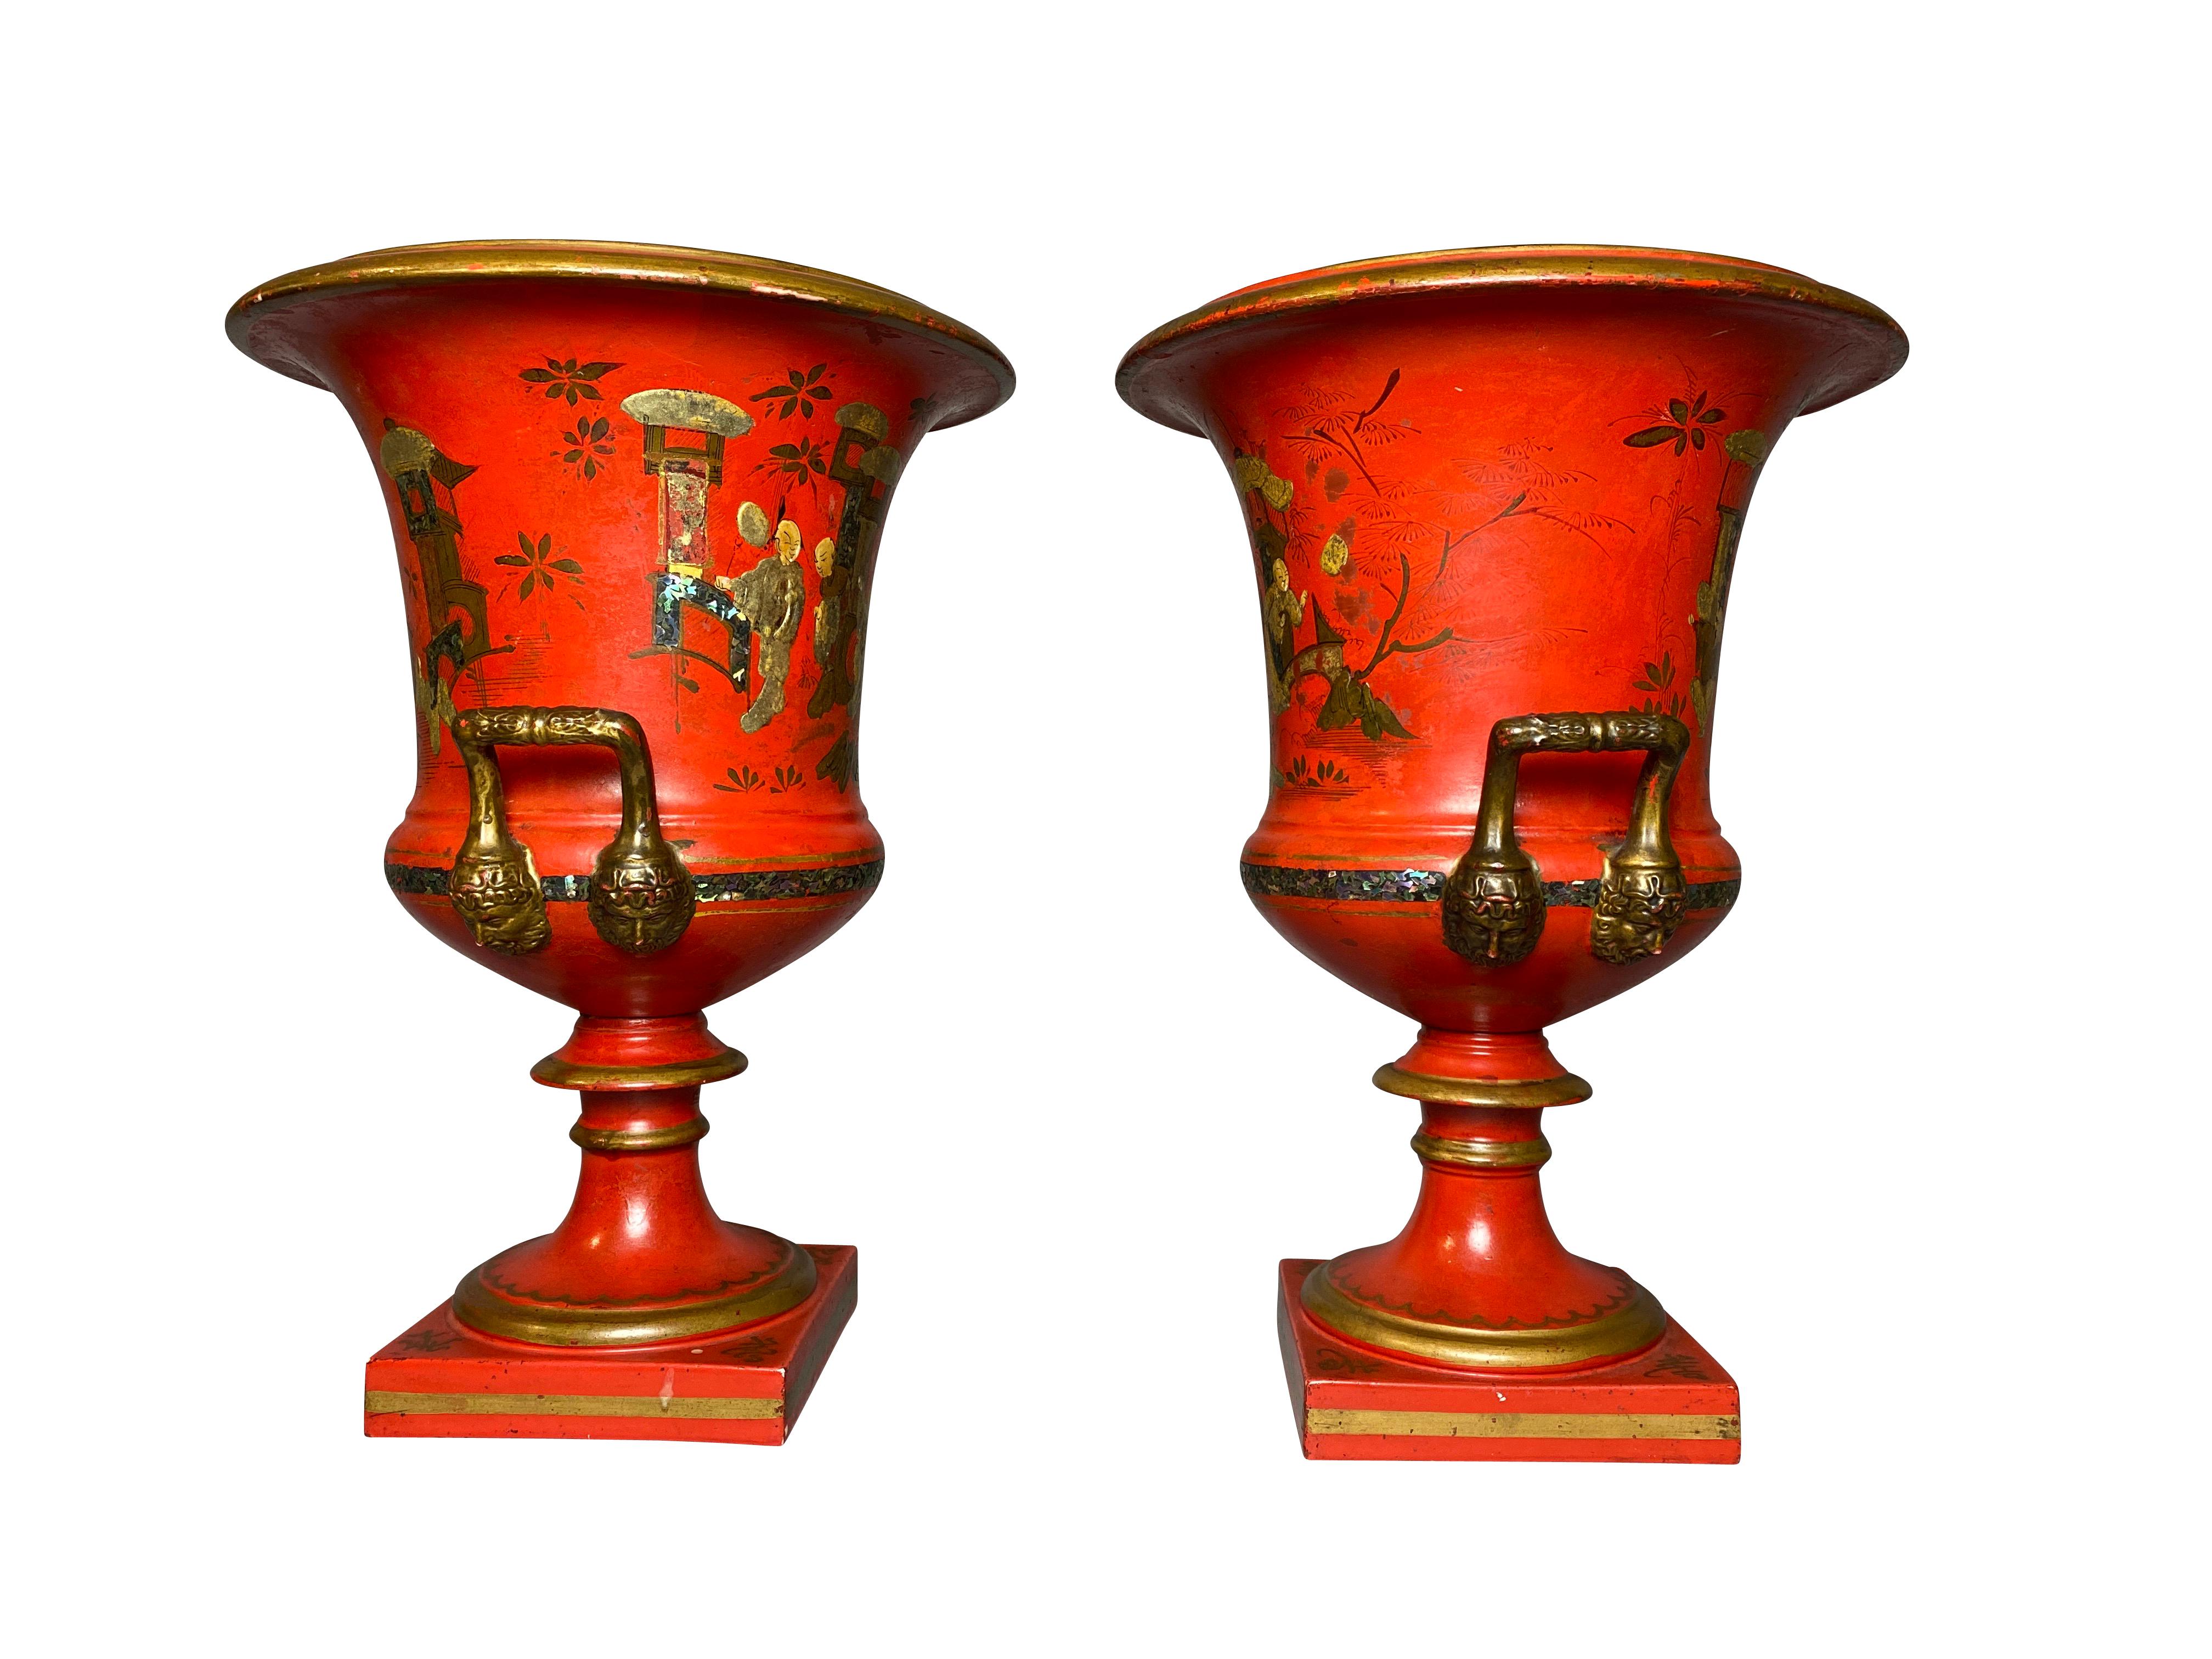 Early 19th Century Pair of French Porcelain Campagna Vases with Later Japanned Decoration